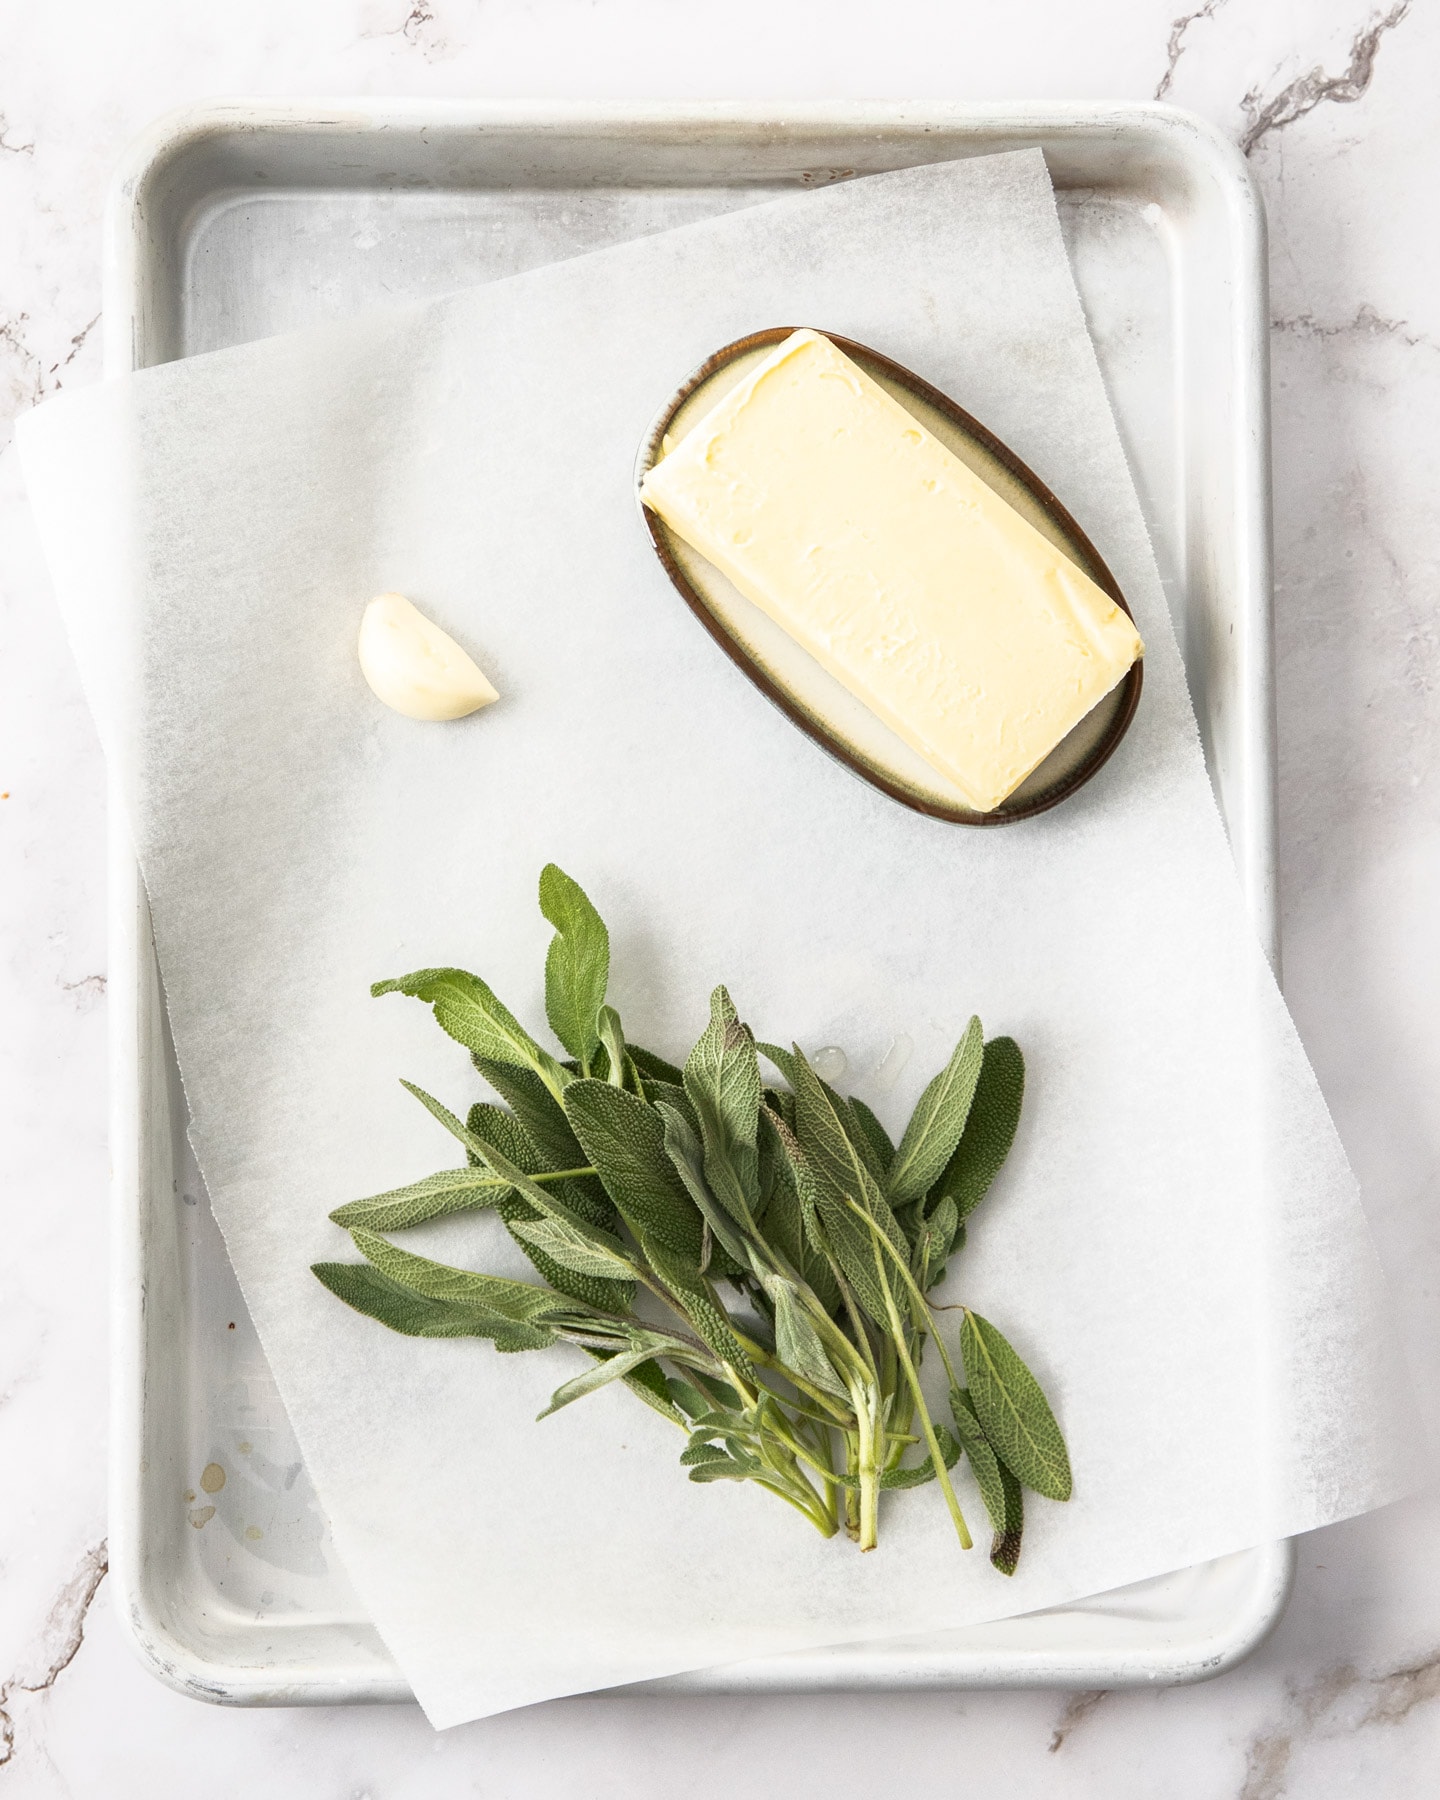 Ingredients for sage butter sauce on a baking tray.